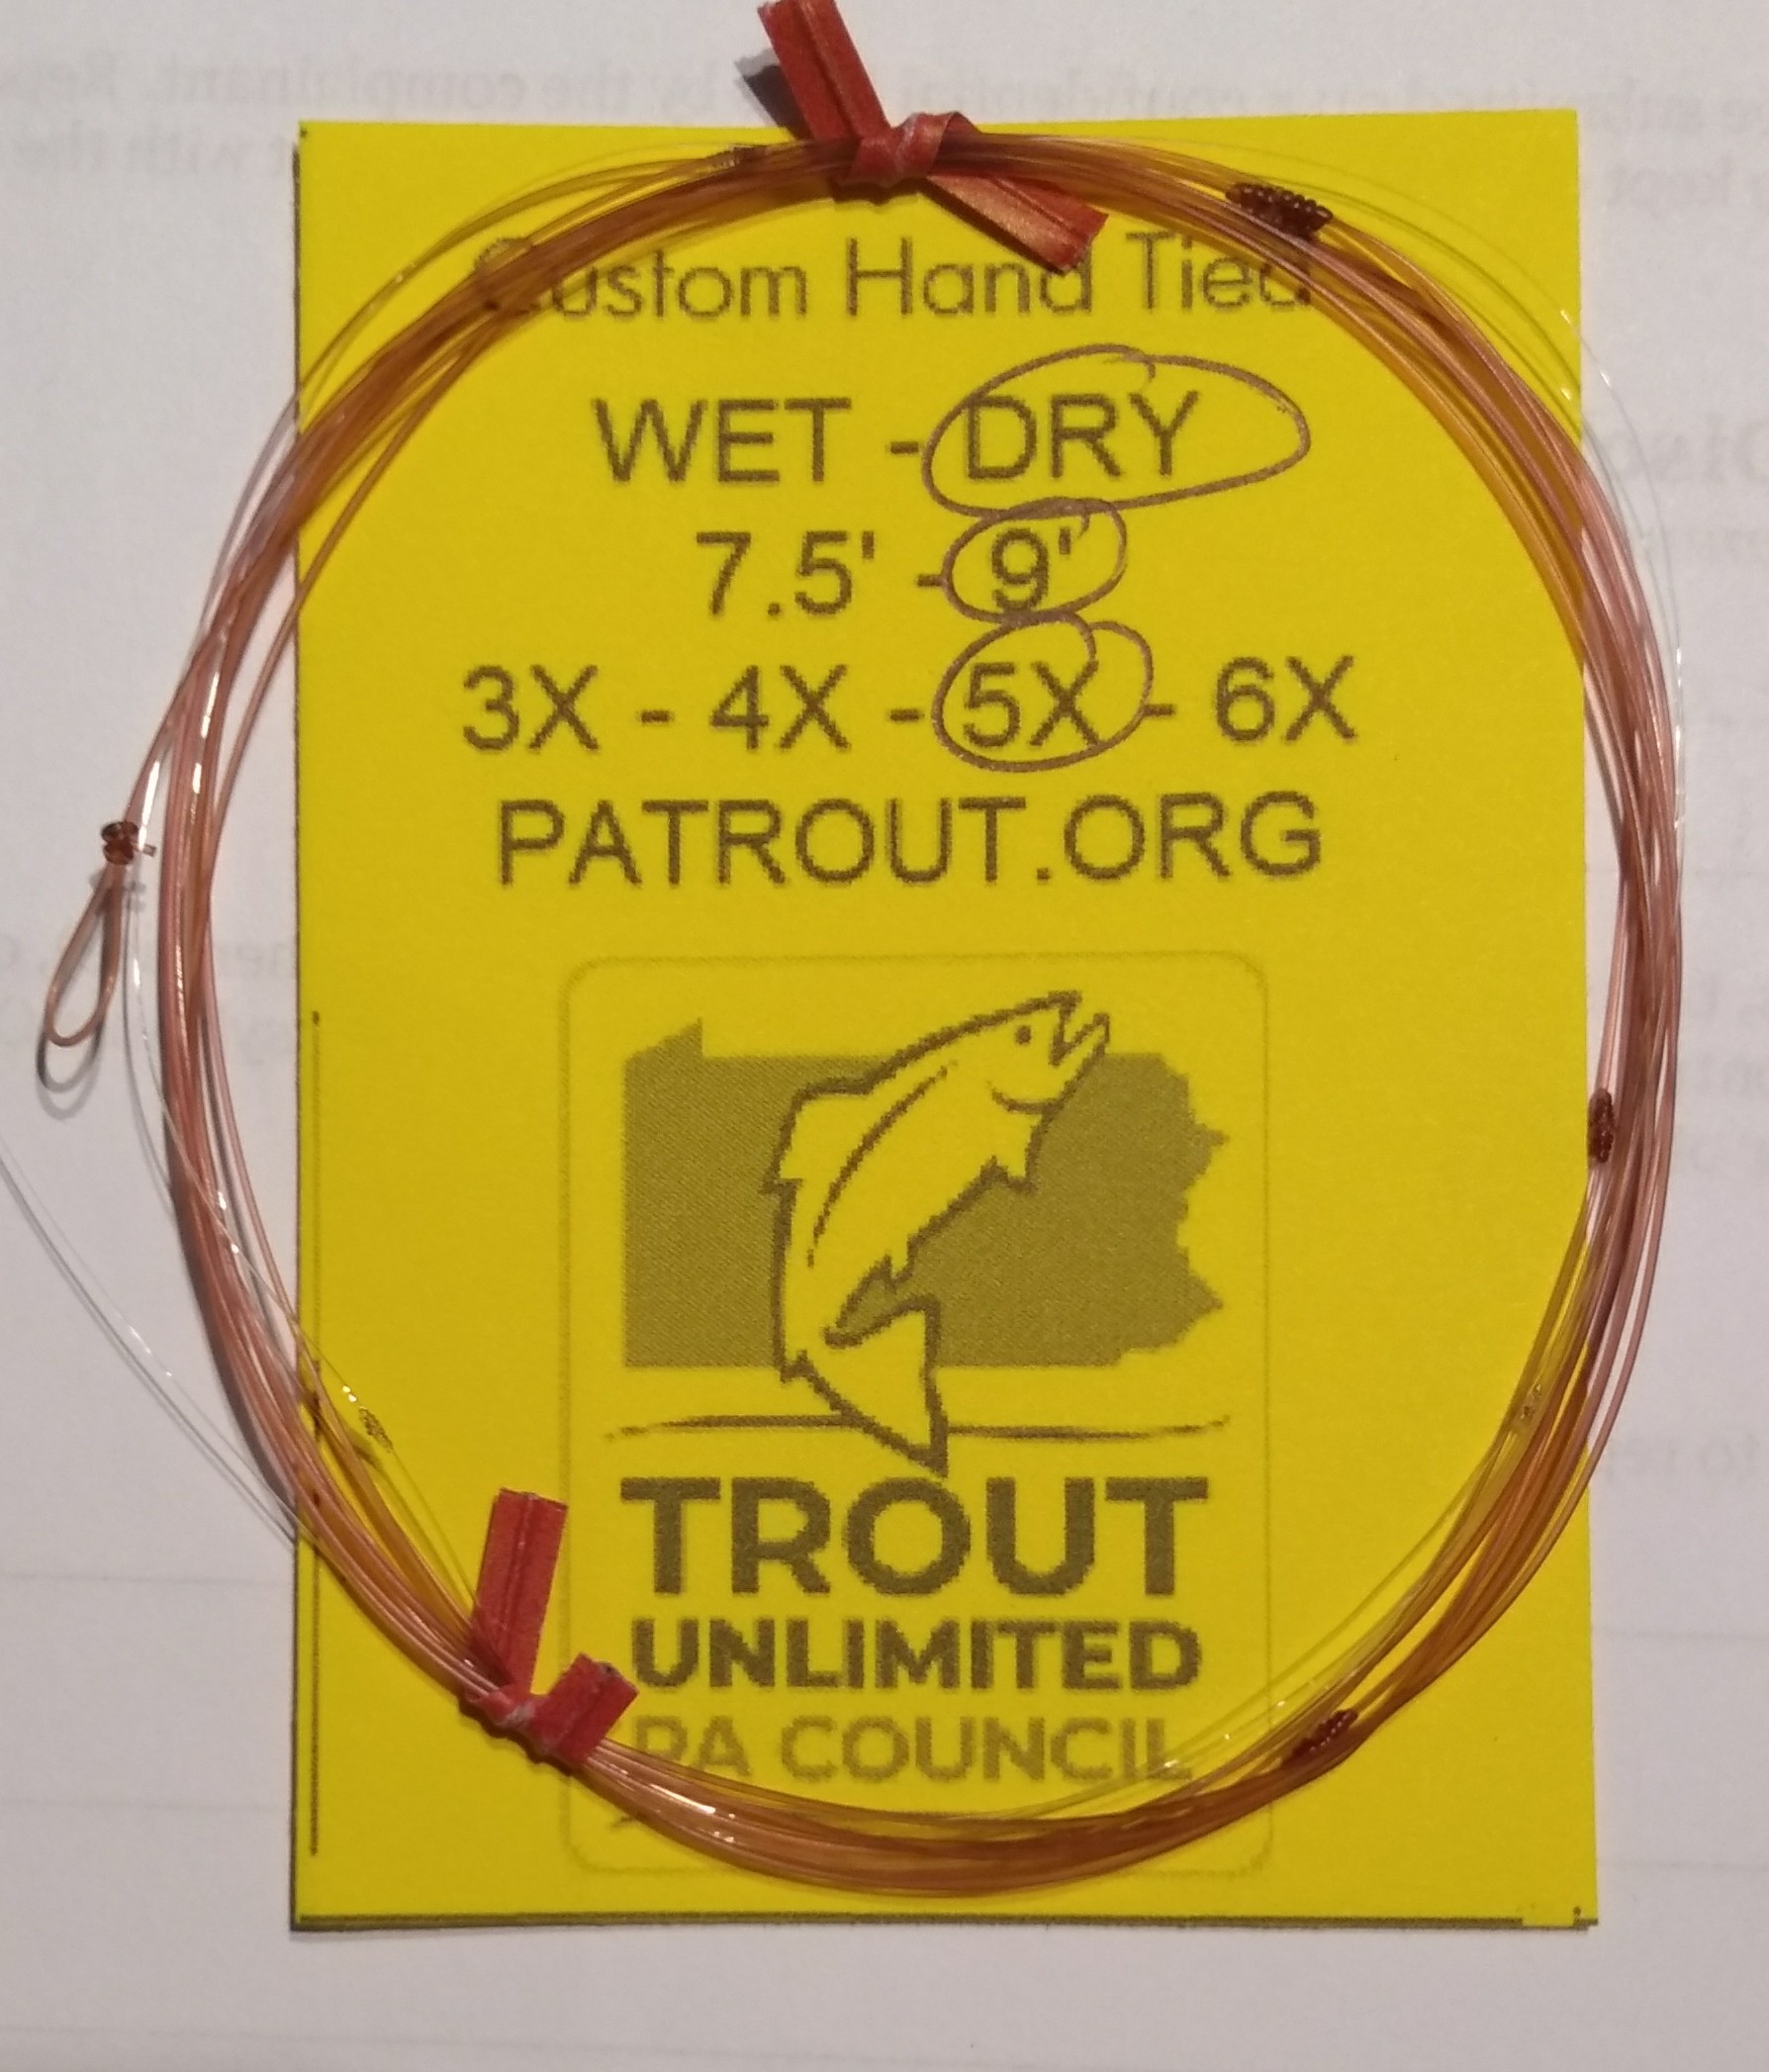 Custom-Tied Tapered Leaders – PA Trout